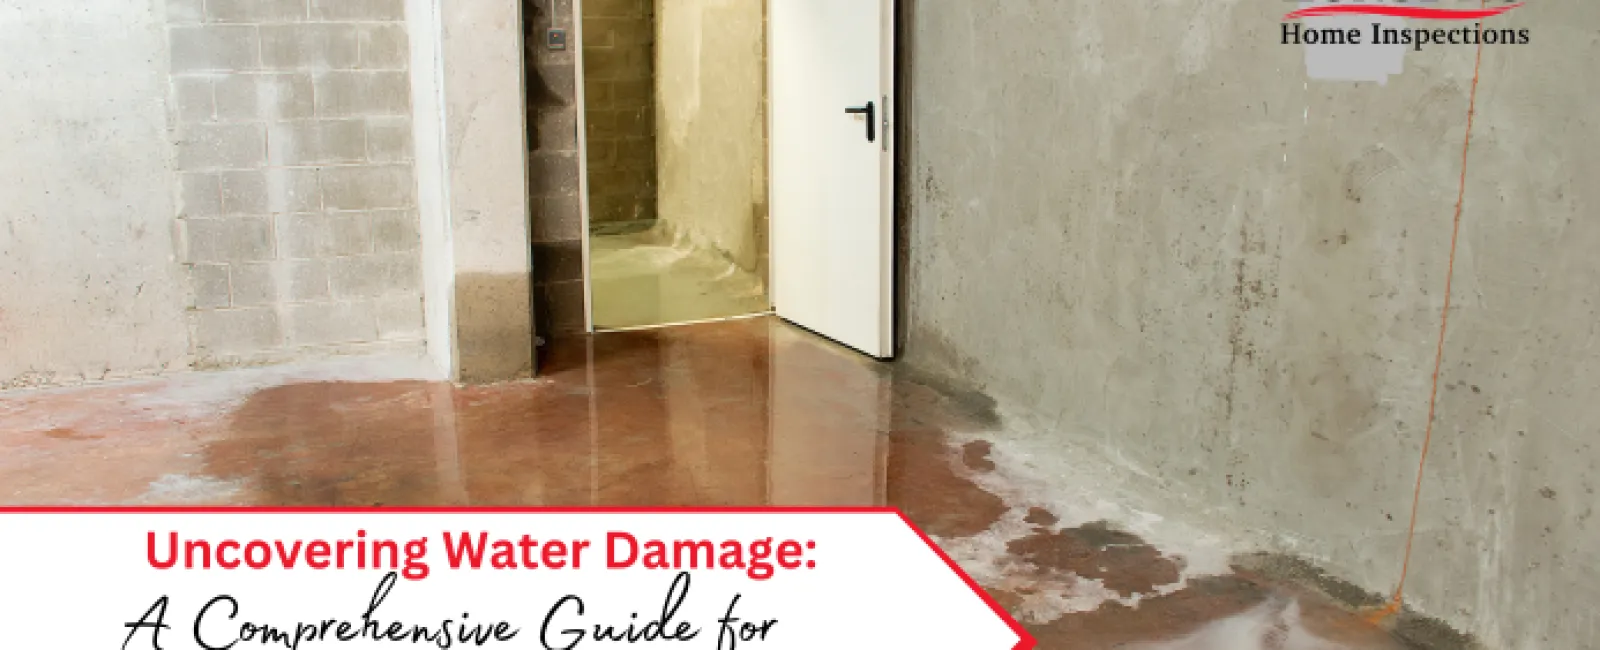 Uncovering Water Damage: A Comprehensive Guide for Homeowners in Georgia